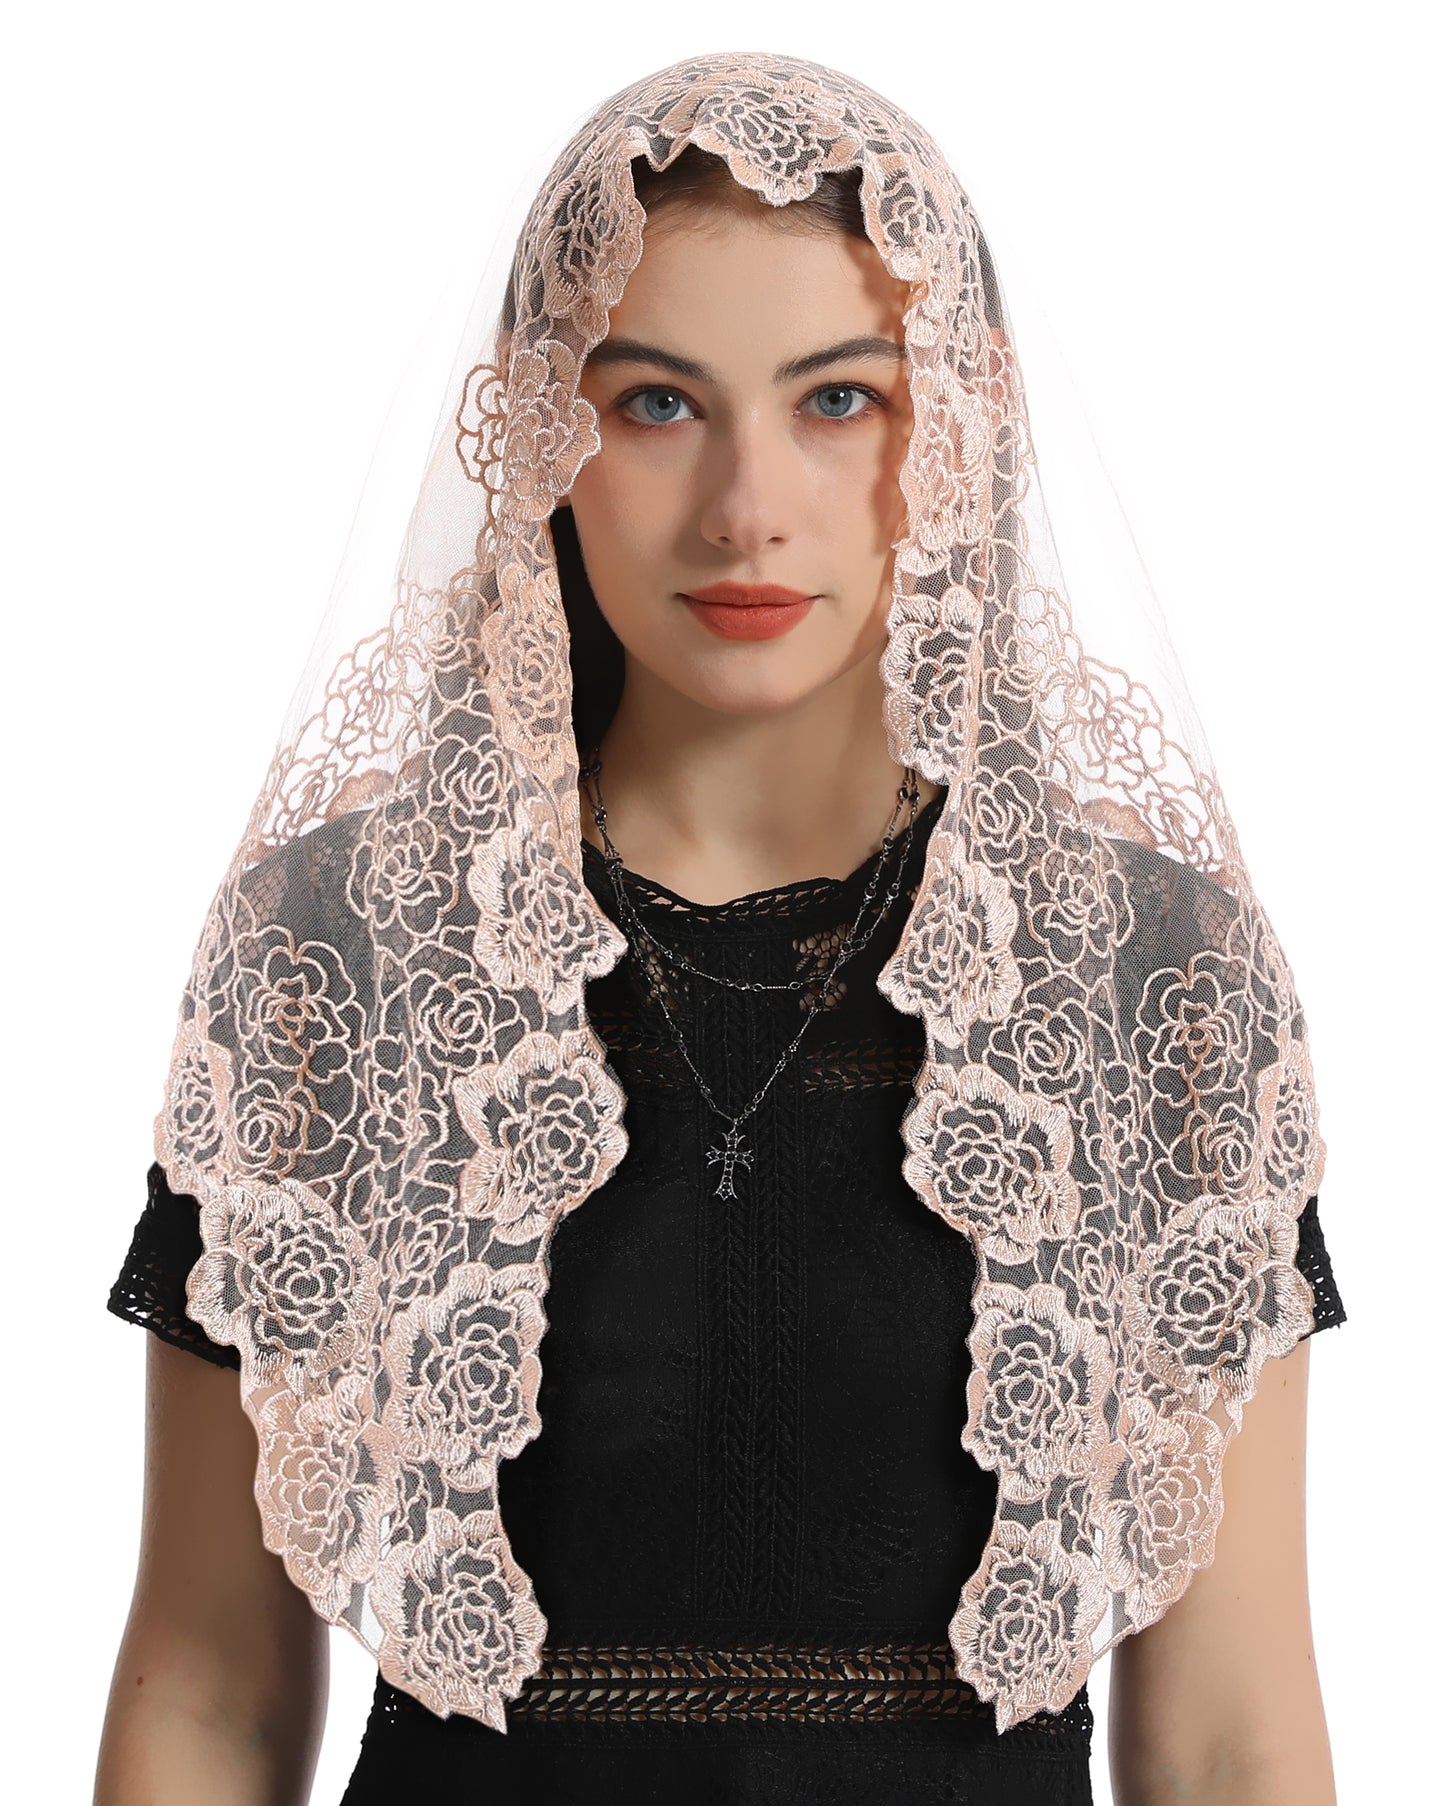 Spanish Style Church Lace Veils- Traditional Vintage Mantilla Veil Latin Mass Head Covering for Women